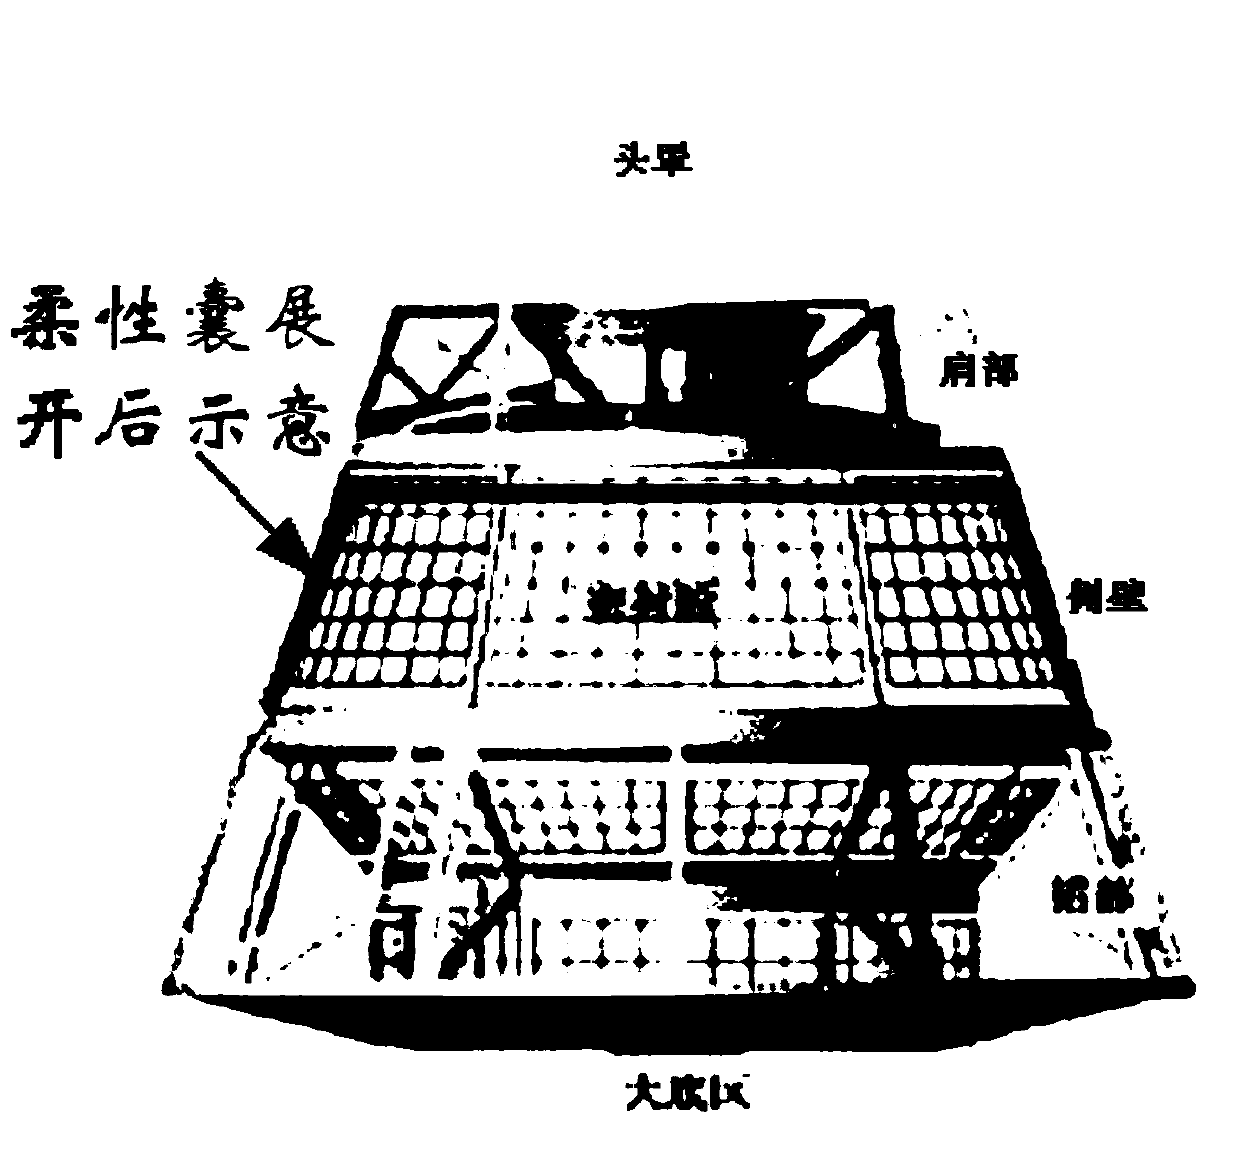 Pressure protection device for sealed cabin of manned spacecraft under emergency pressure loss condition